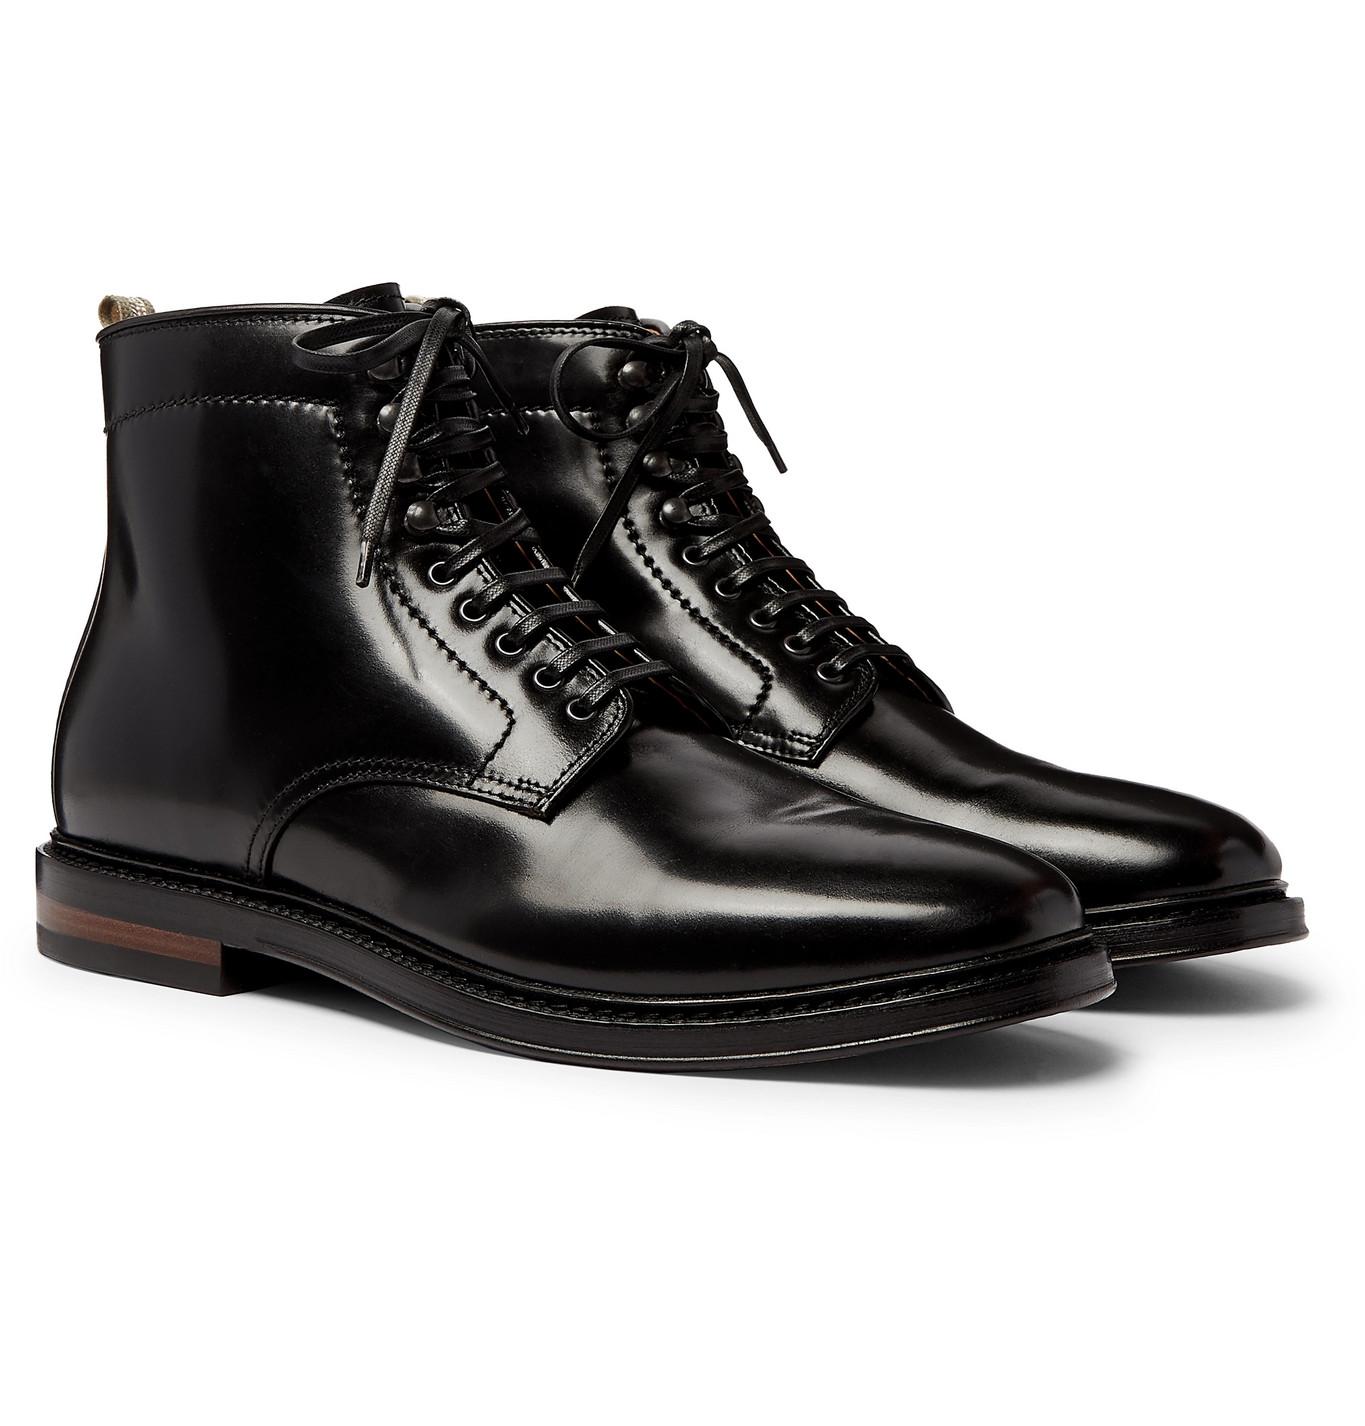 Officine Creative Hopkins Cordovan Leather Boots in Black for Men - Lyst